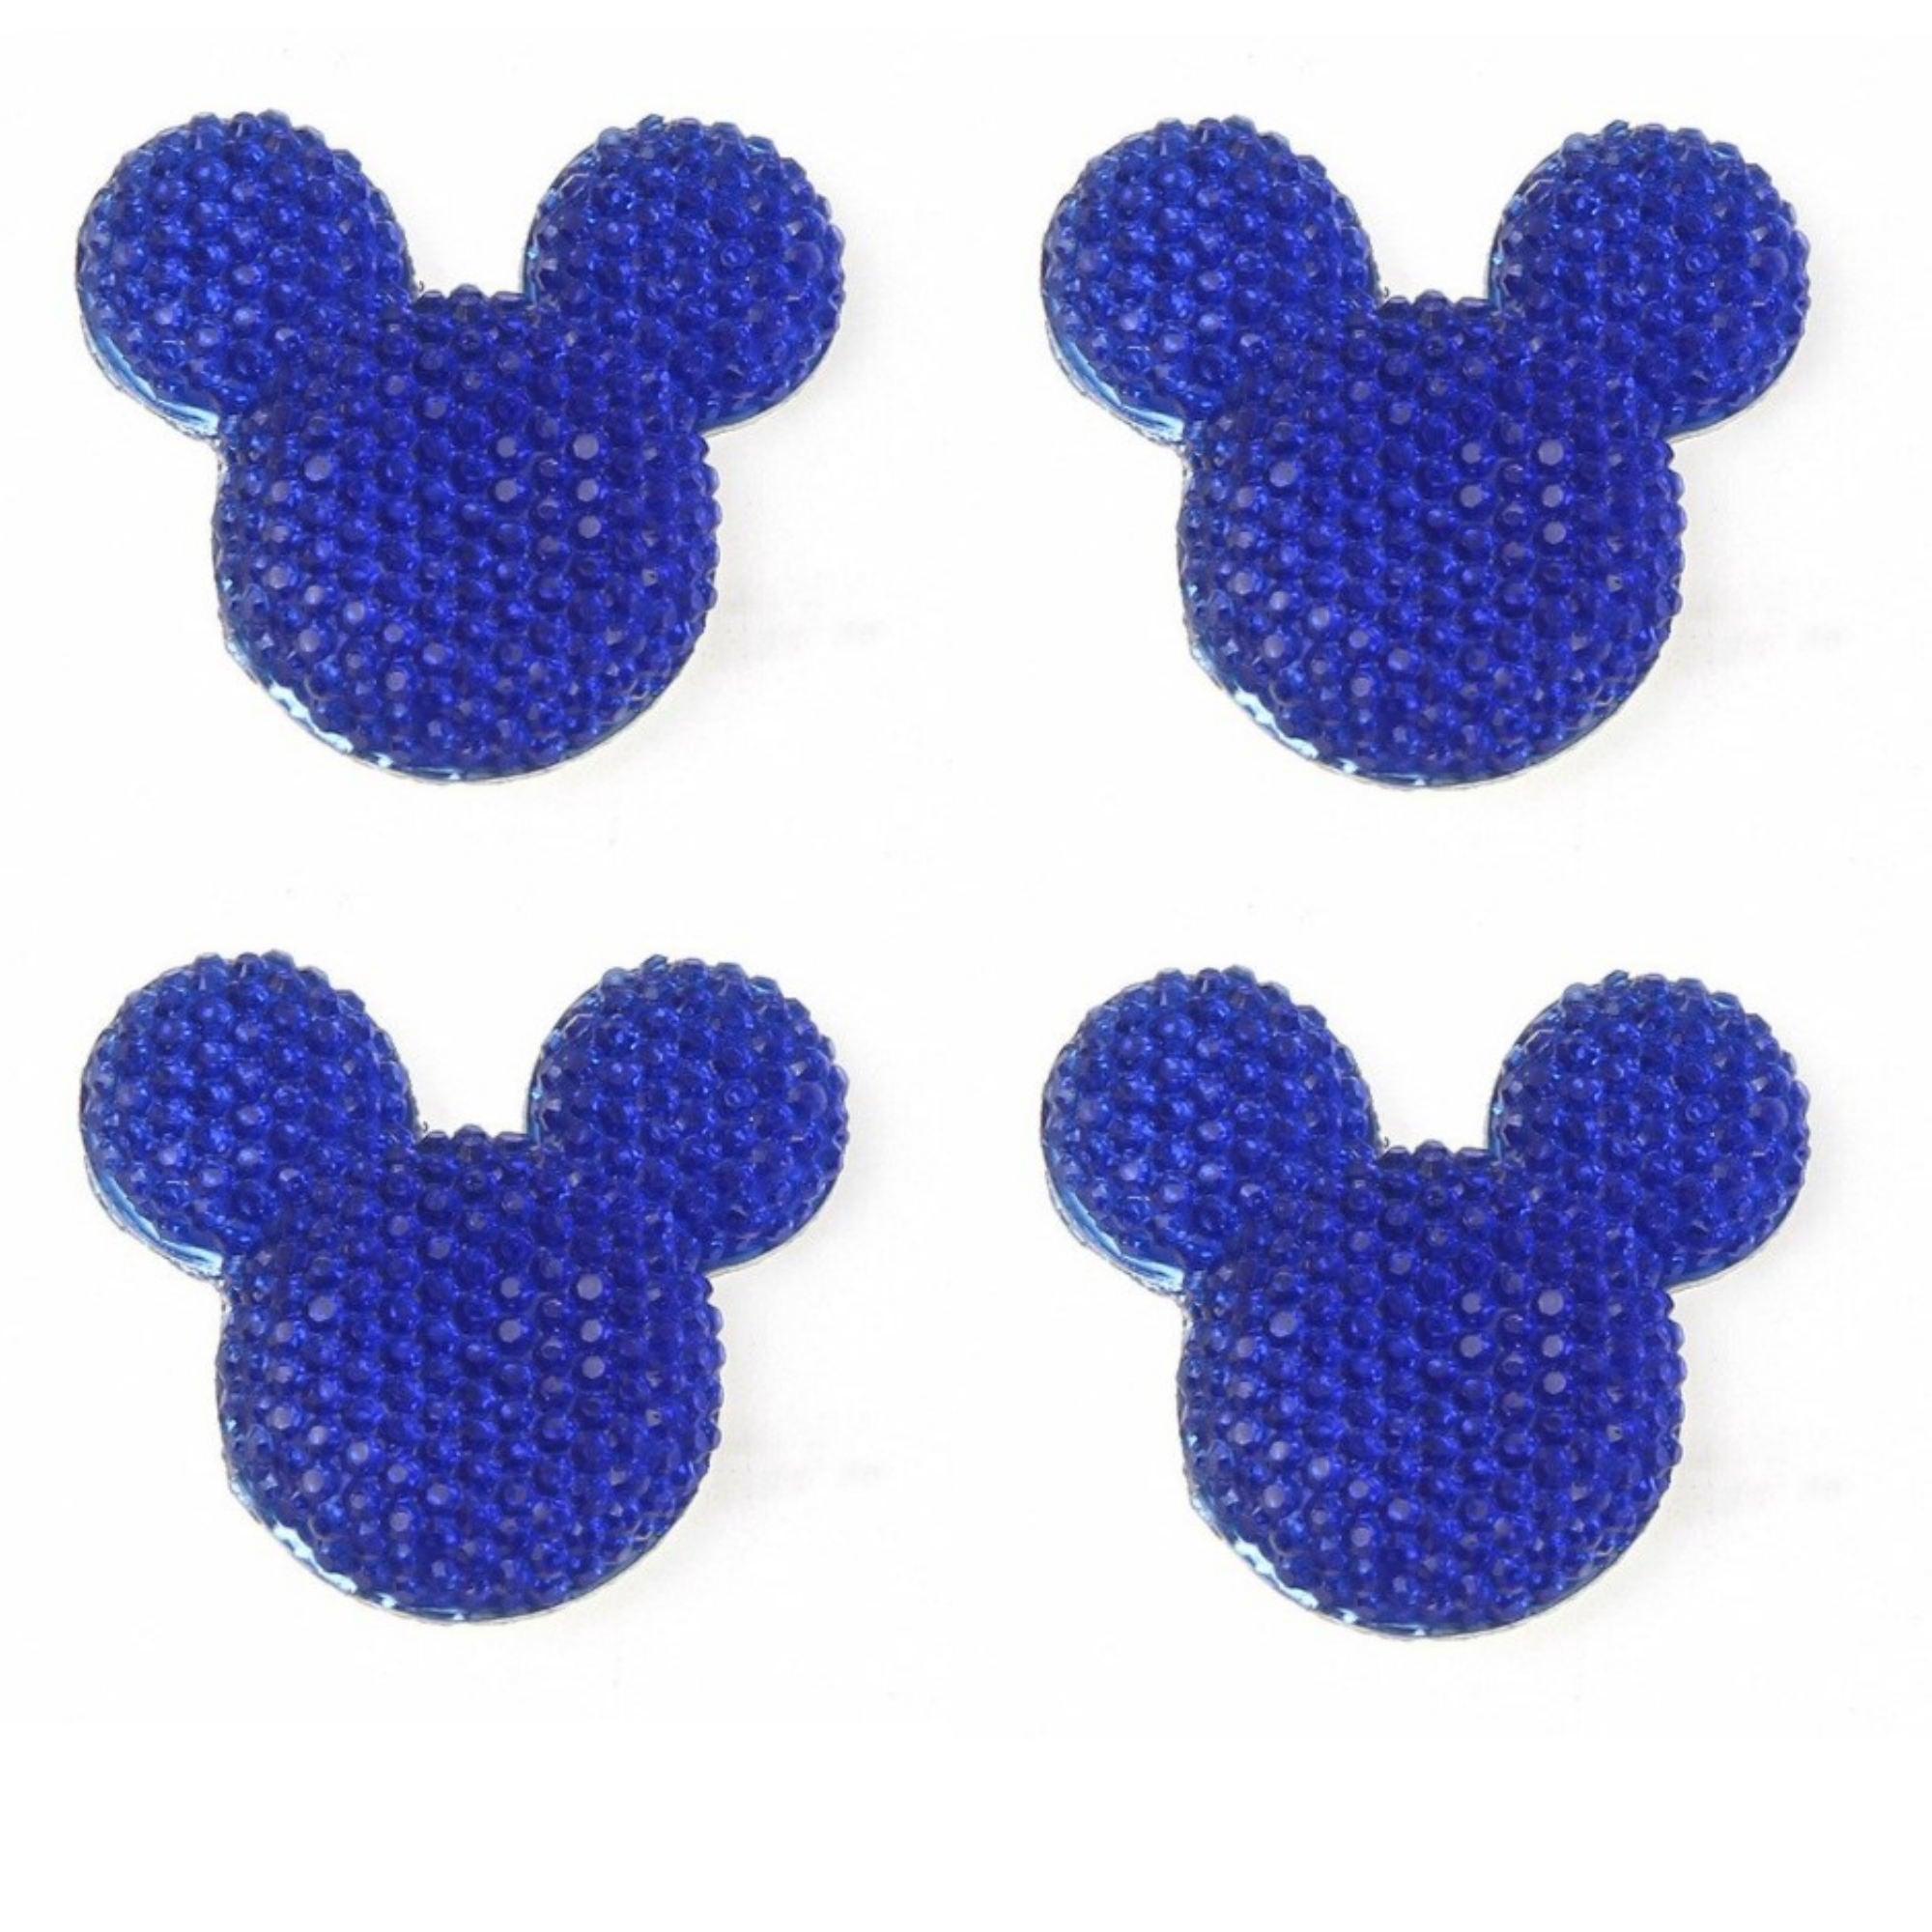 Disneyana Collection 1.25" Bling Blue Mouse Ears Scrapbook Embellishments - 4 Pieces - Scrapbook Supply Companies